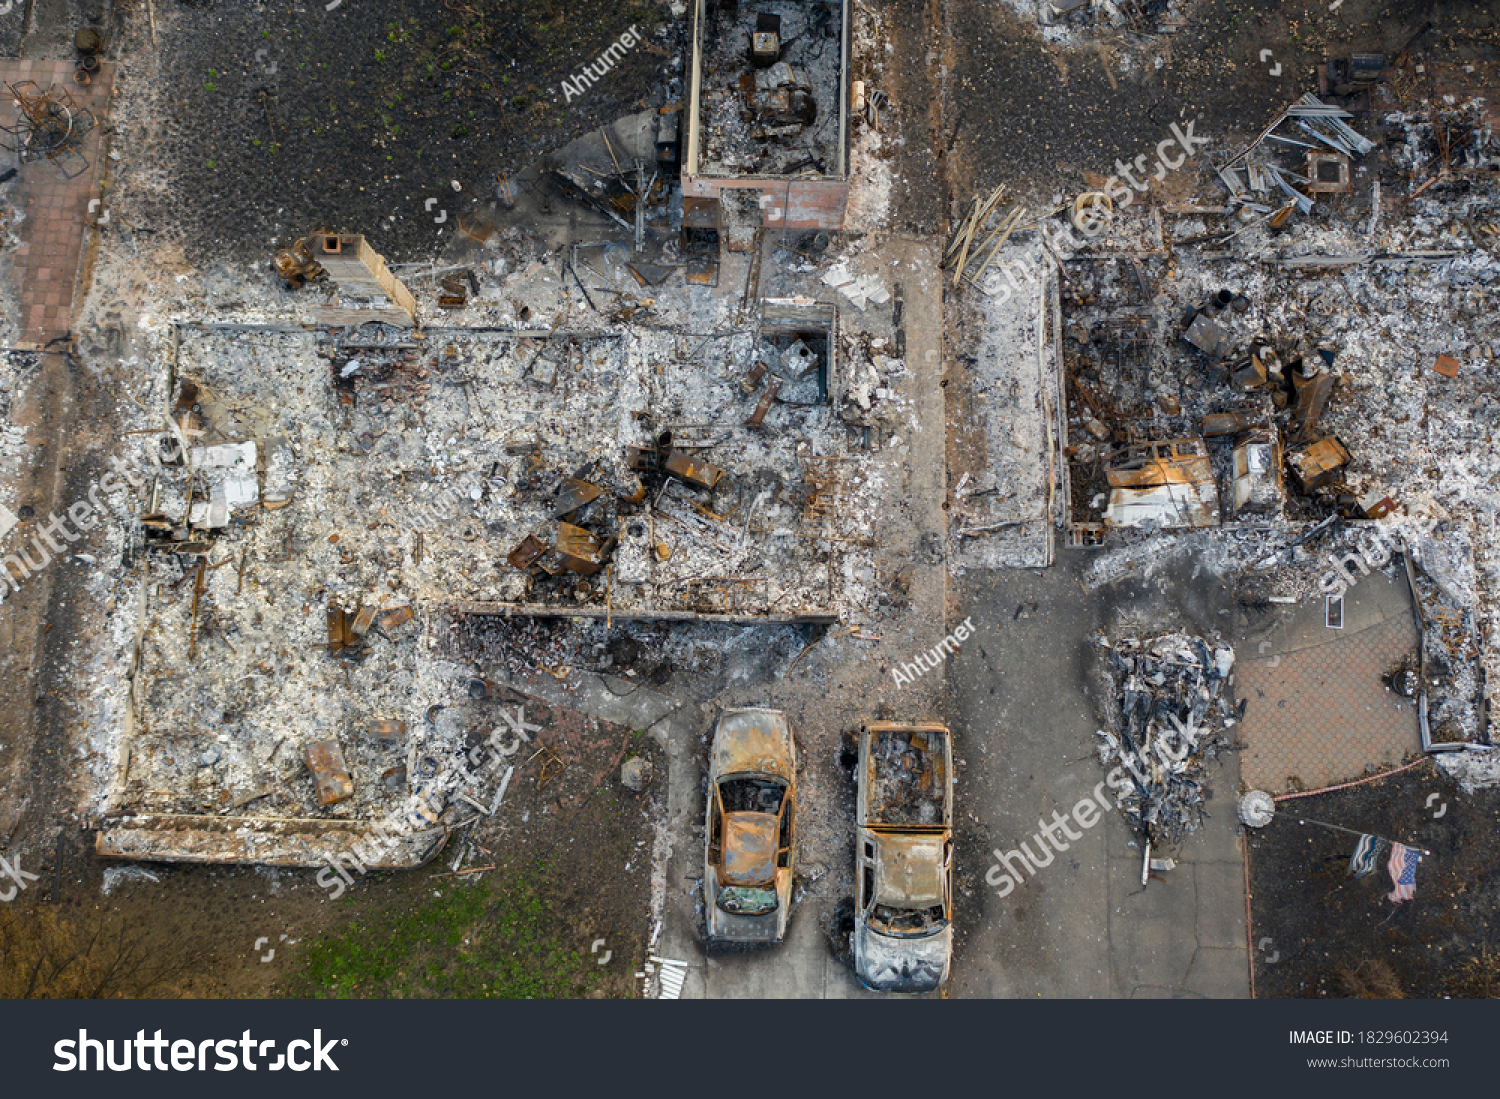 Aerial view of a burned down community and vehicles from the 2020 Almeda forest fire in Southern Oregon, USA #1829602394